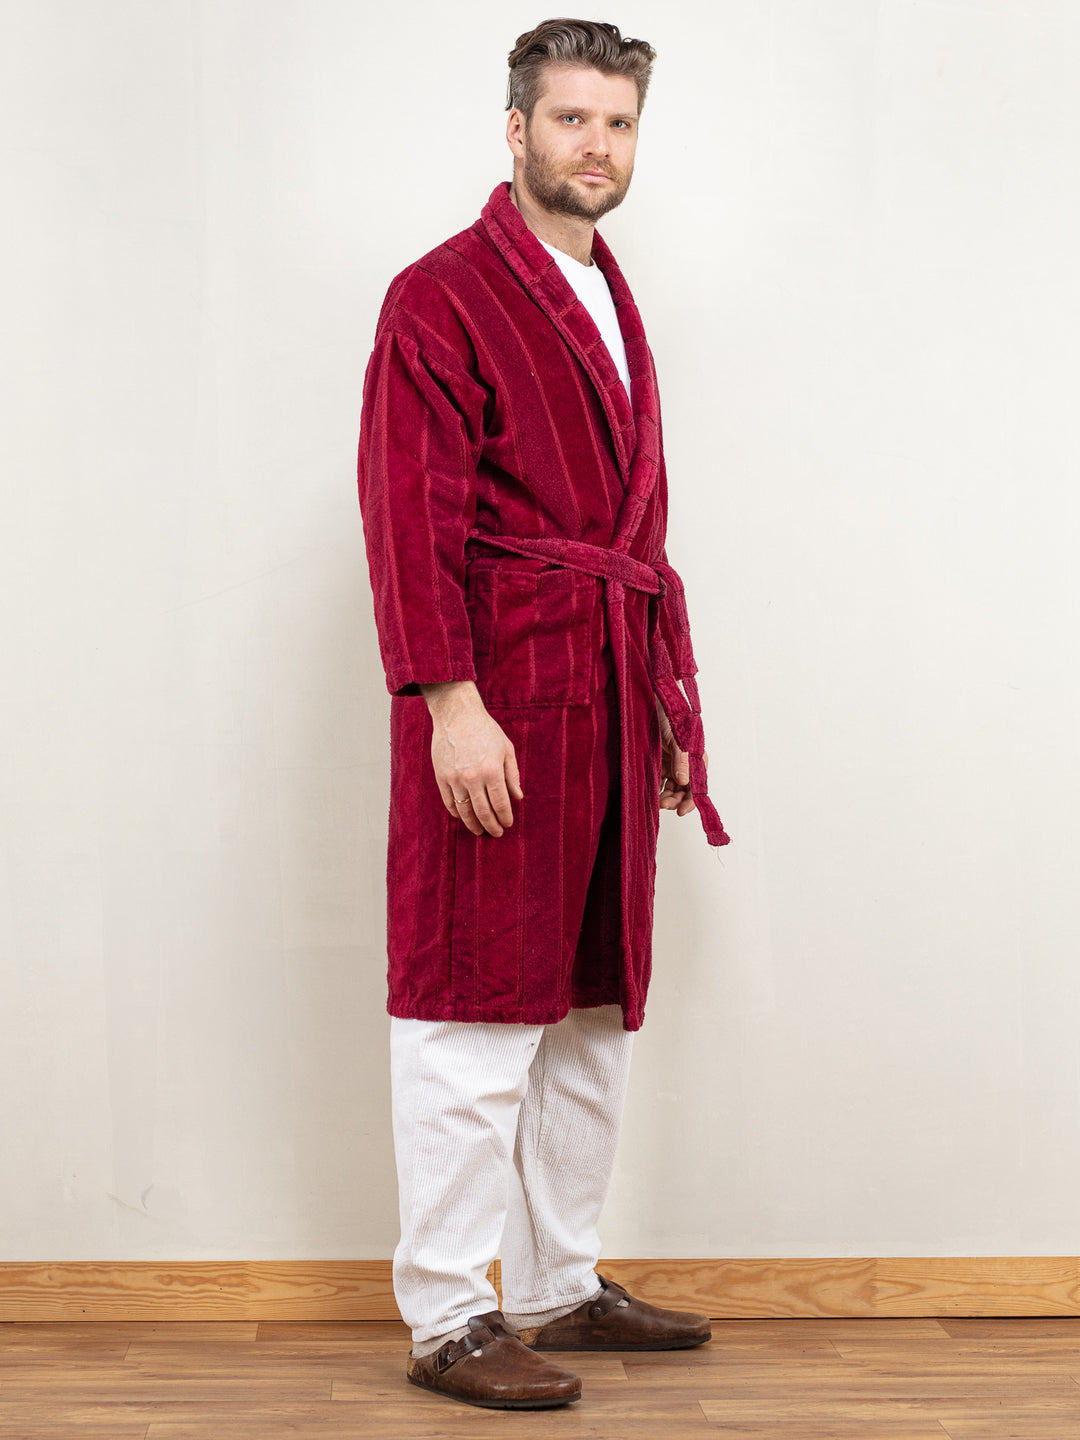 Men Dressing Gown vintage 90's morning robe bathrobe red terry cotton wrap belted hugh hefner gift for him birthday christmas size large